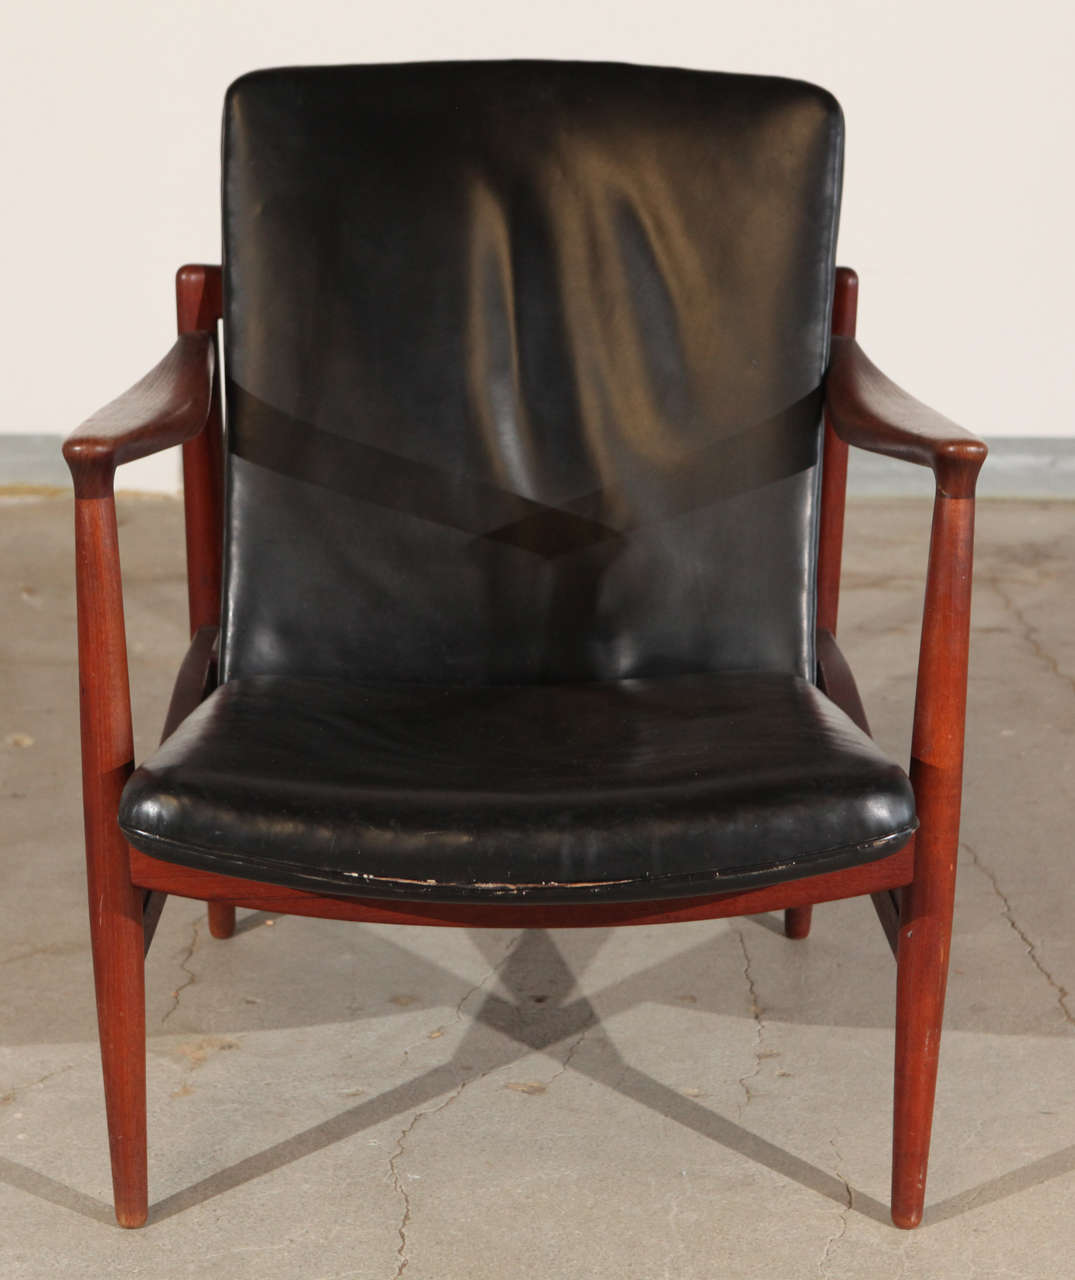 Jacob Kjaer lounge chair and ottoman with original leather.
Ottoman measures: 16.50 D x 23 W x 15.50 H.